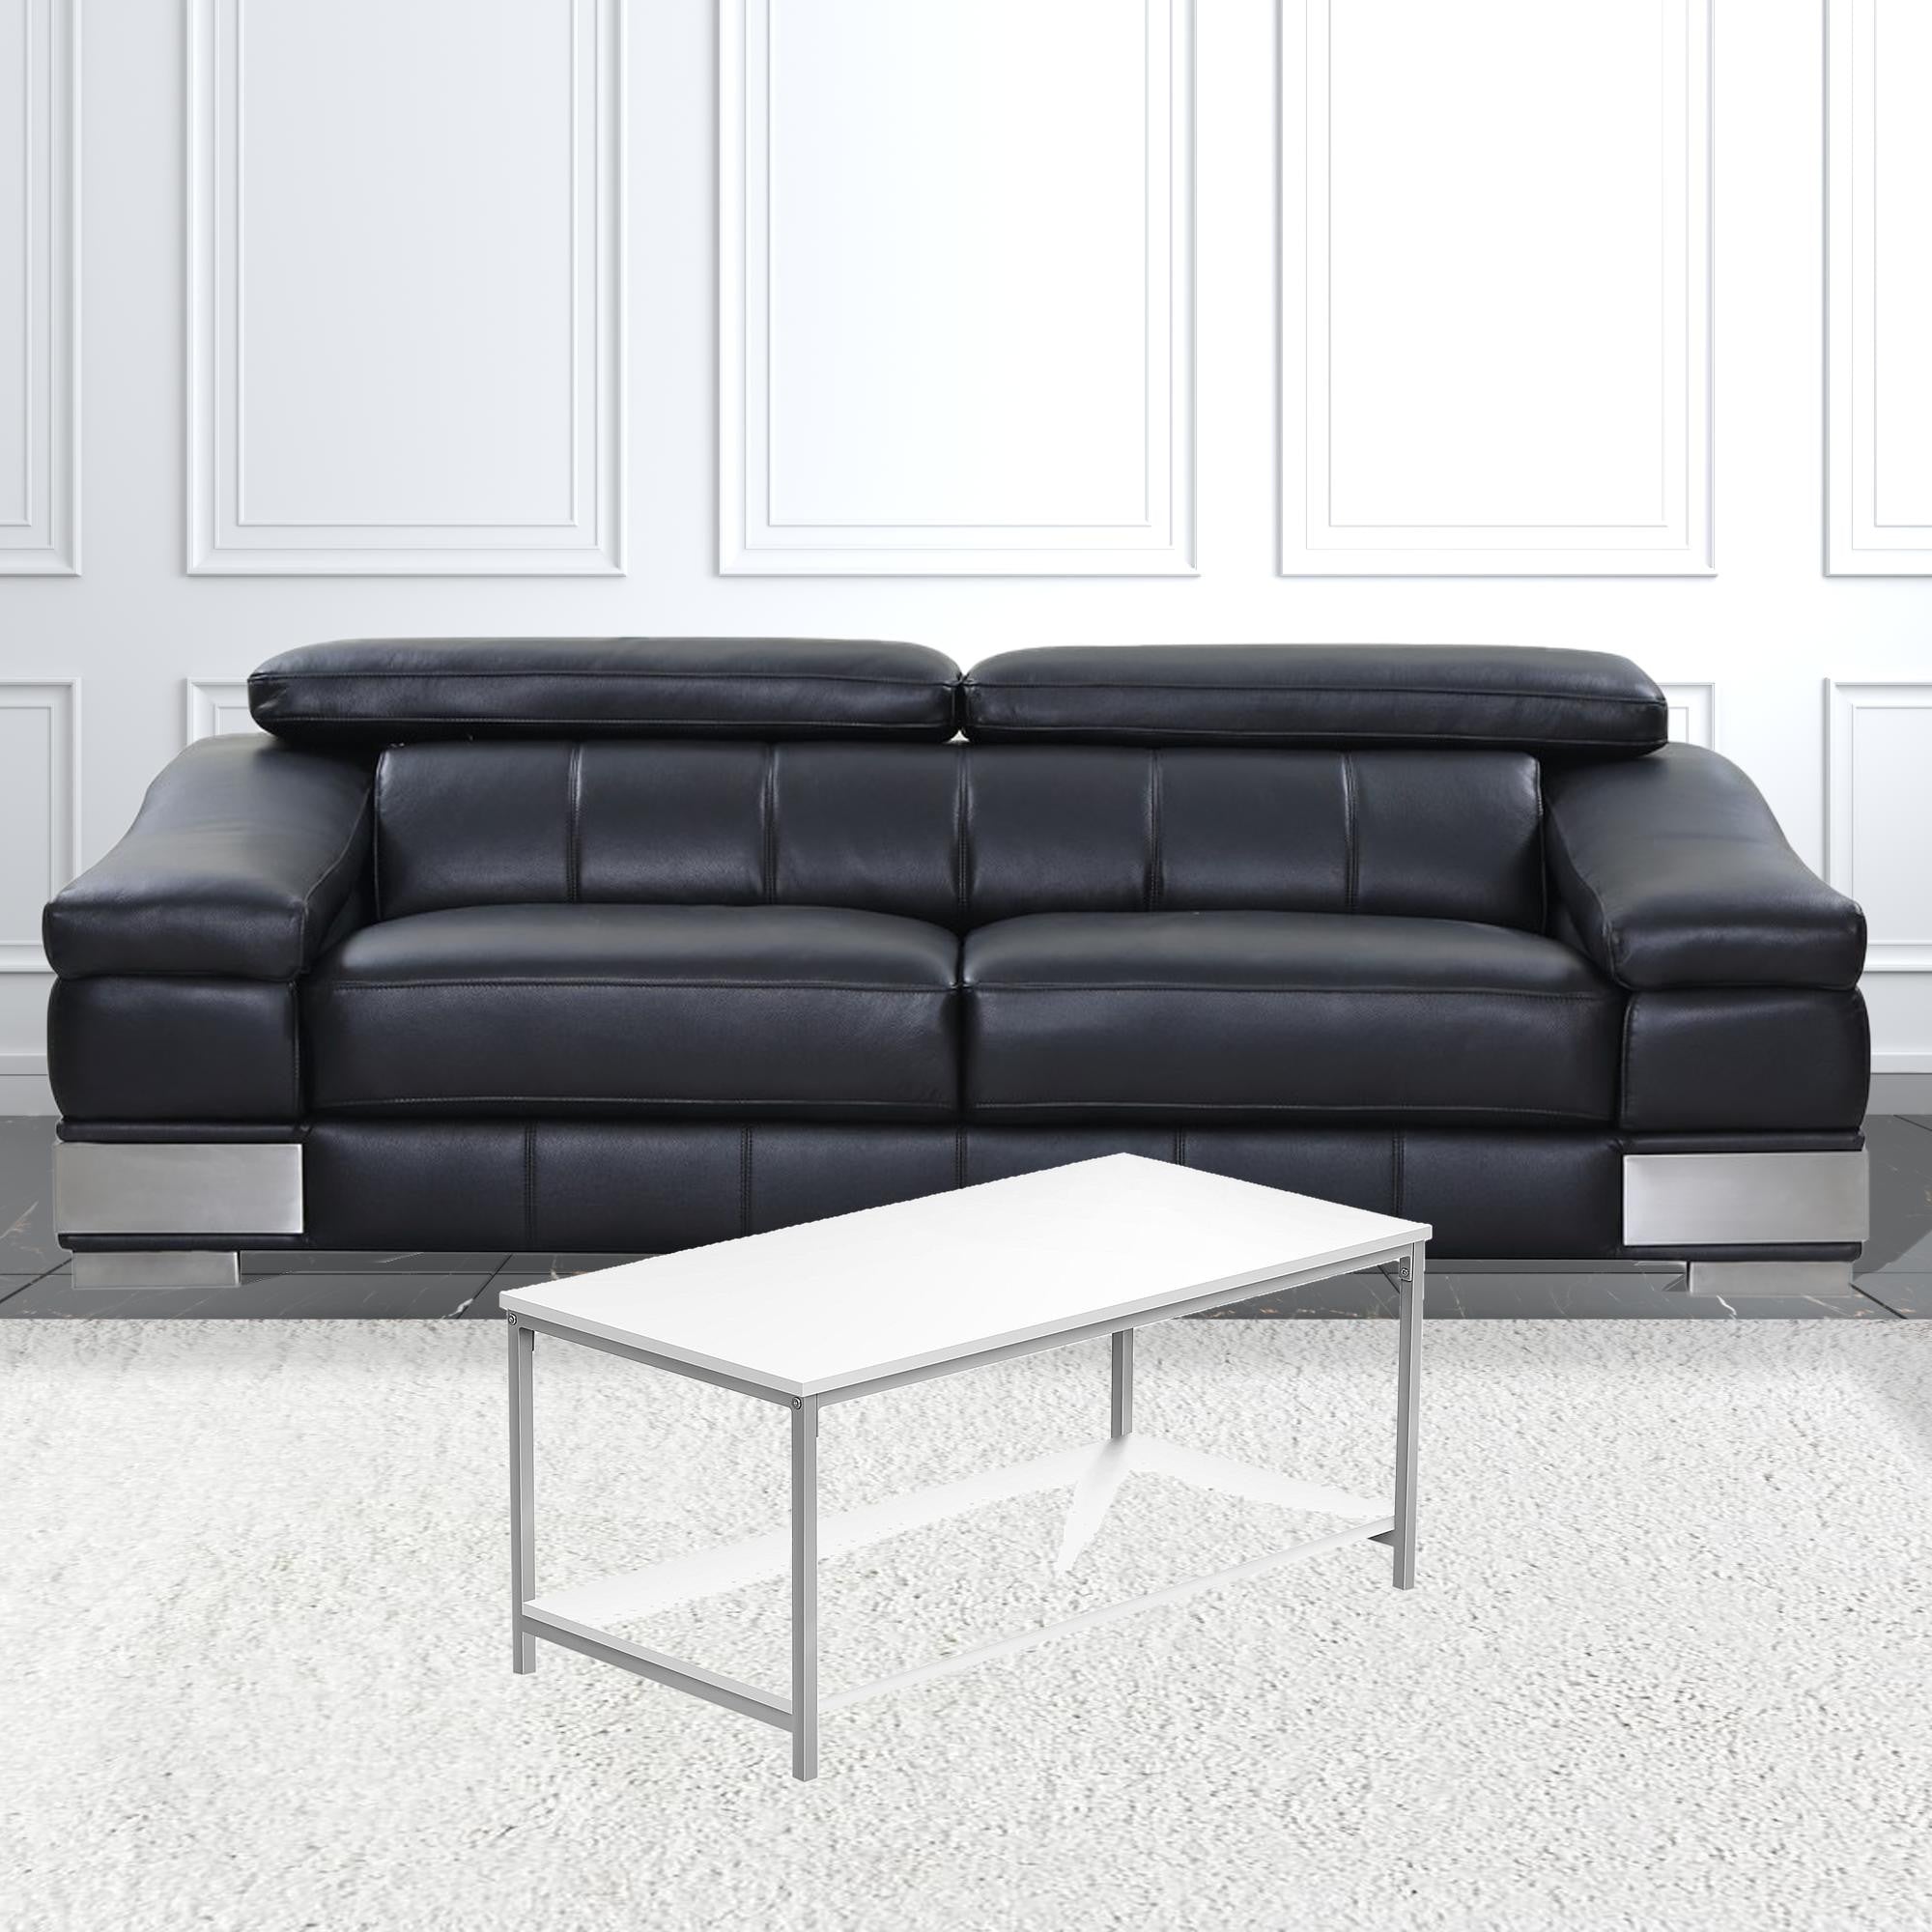 40" White And Silver Rectangular Coffee Table